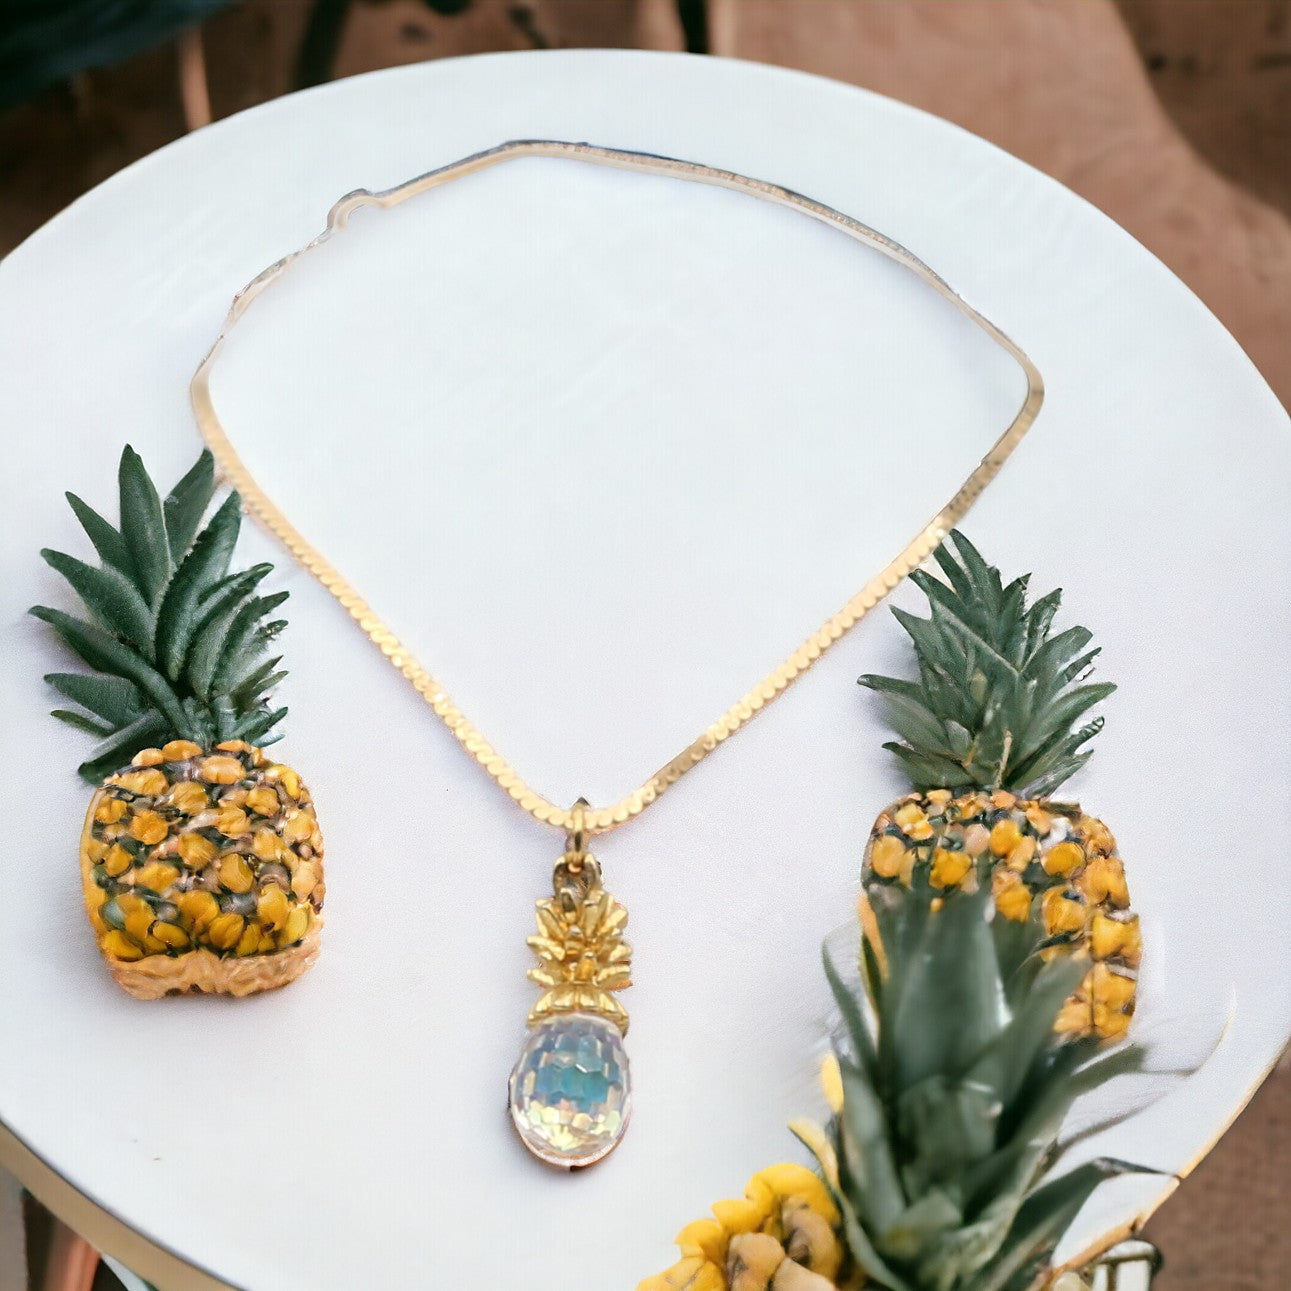 14K Gold 7 inch bracelet with pineapple charm